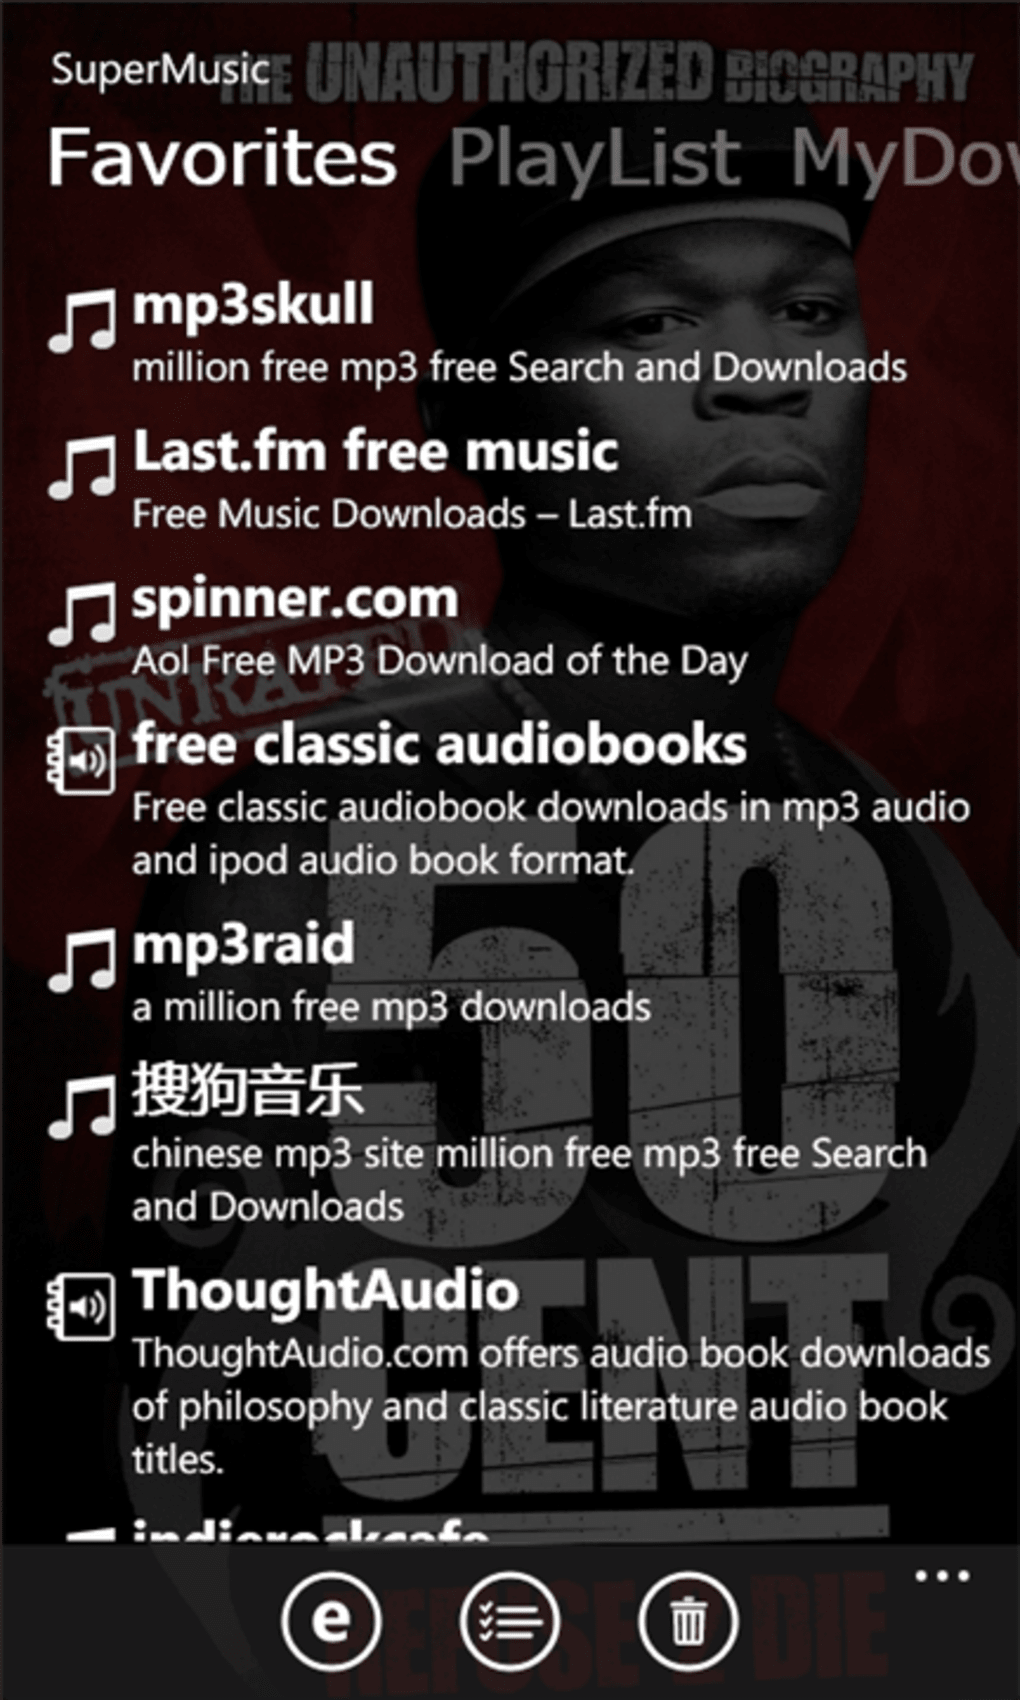 How To Download Free Music On A Windows Phone